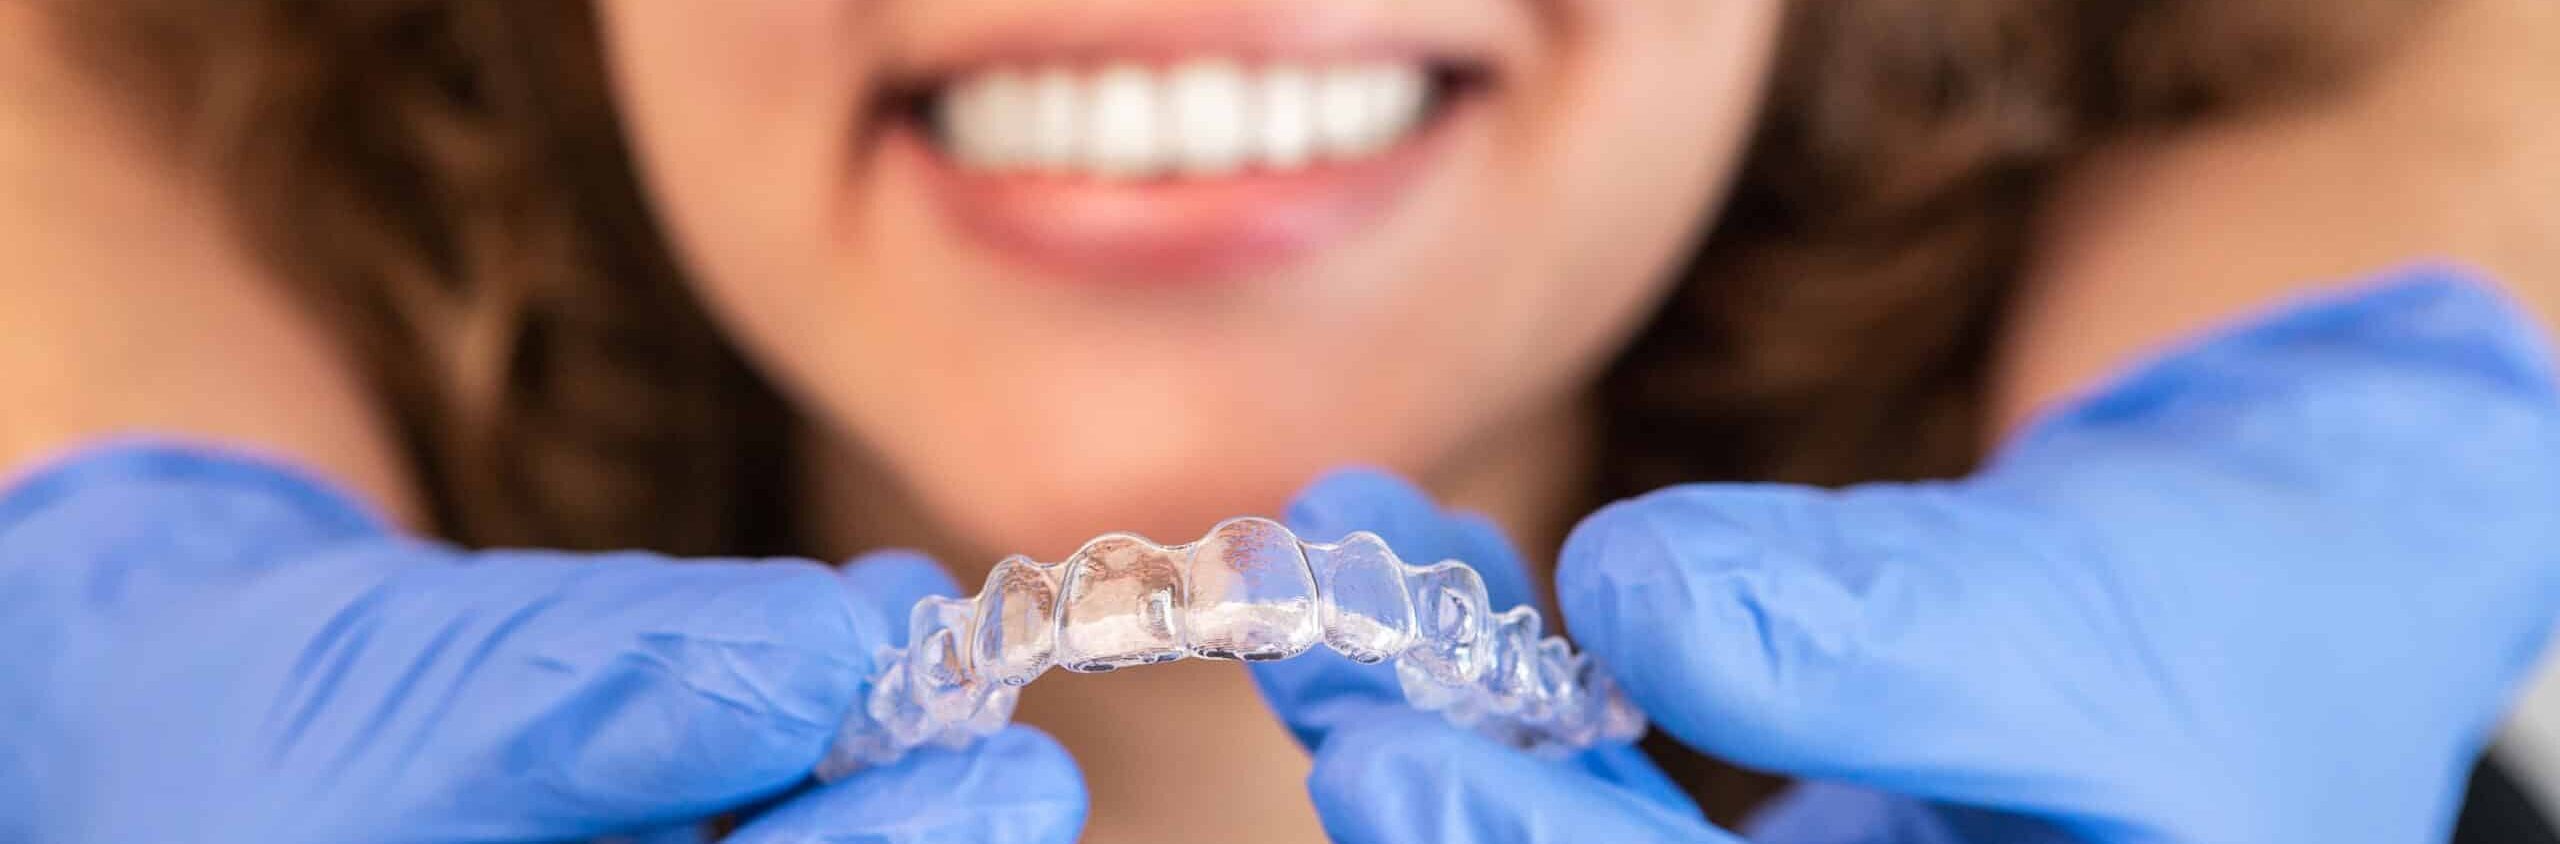 Orthodontist doctor putting silicone invisible transparent braces on woman teeth